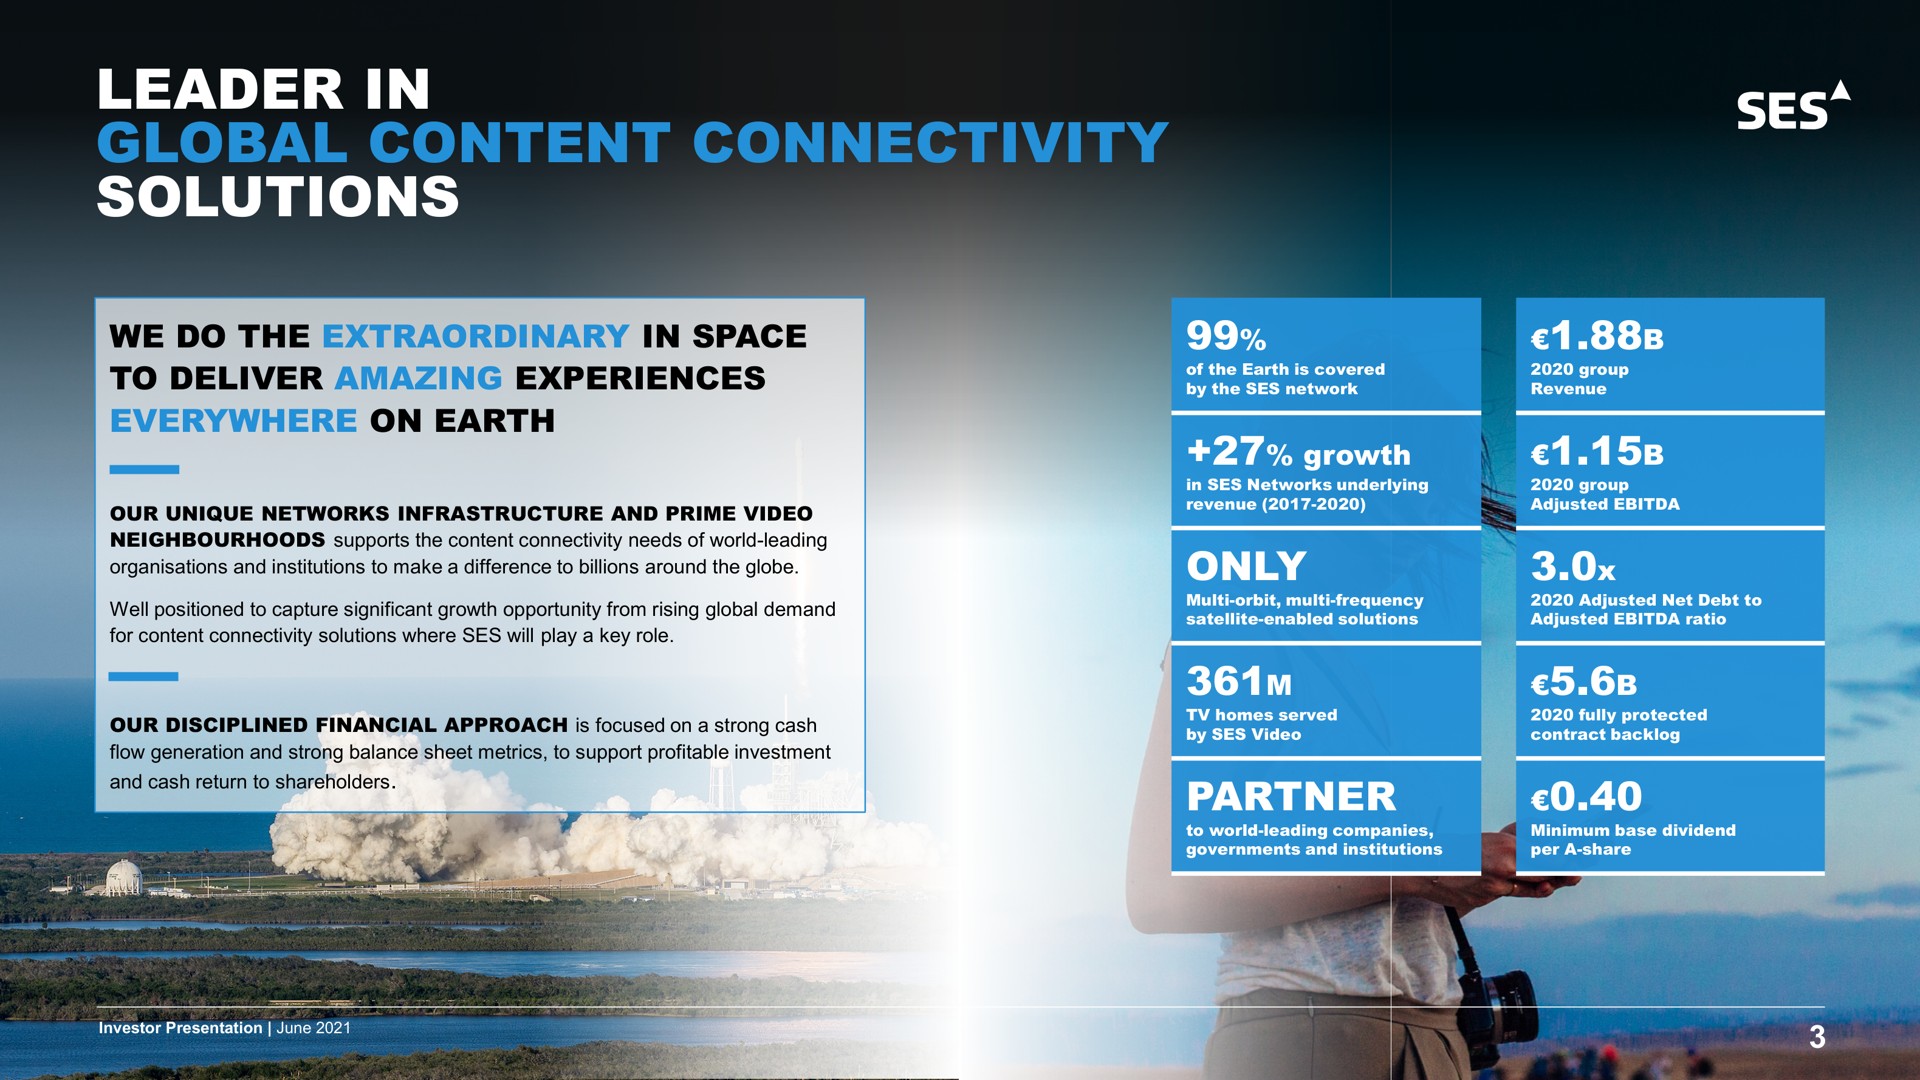 leader in global content connectivity solutions we do the extraordinary in space to deliver amazing experiences everywhere on earth only partner ses a a at | SES